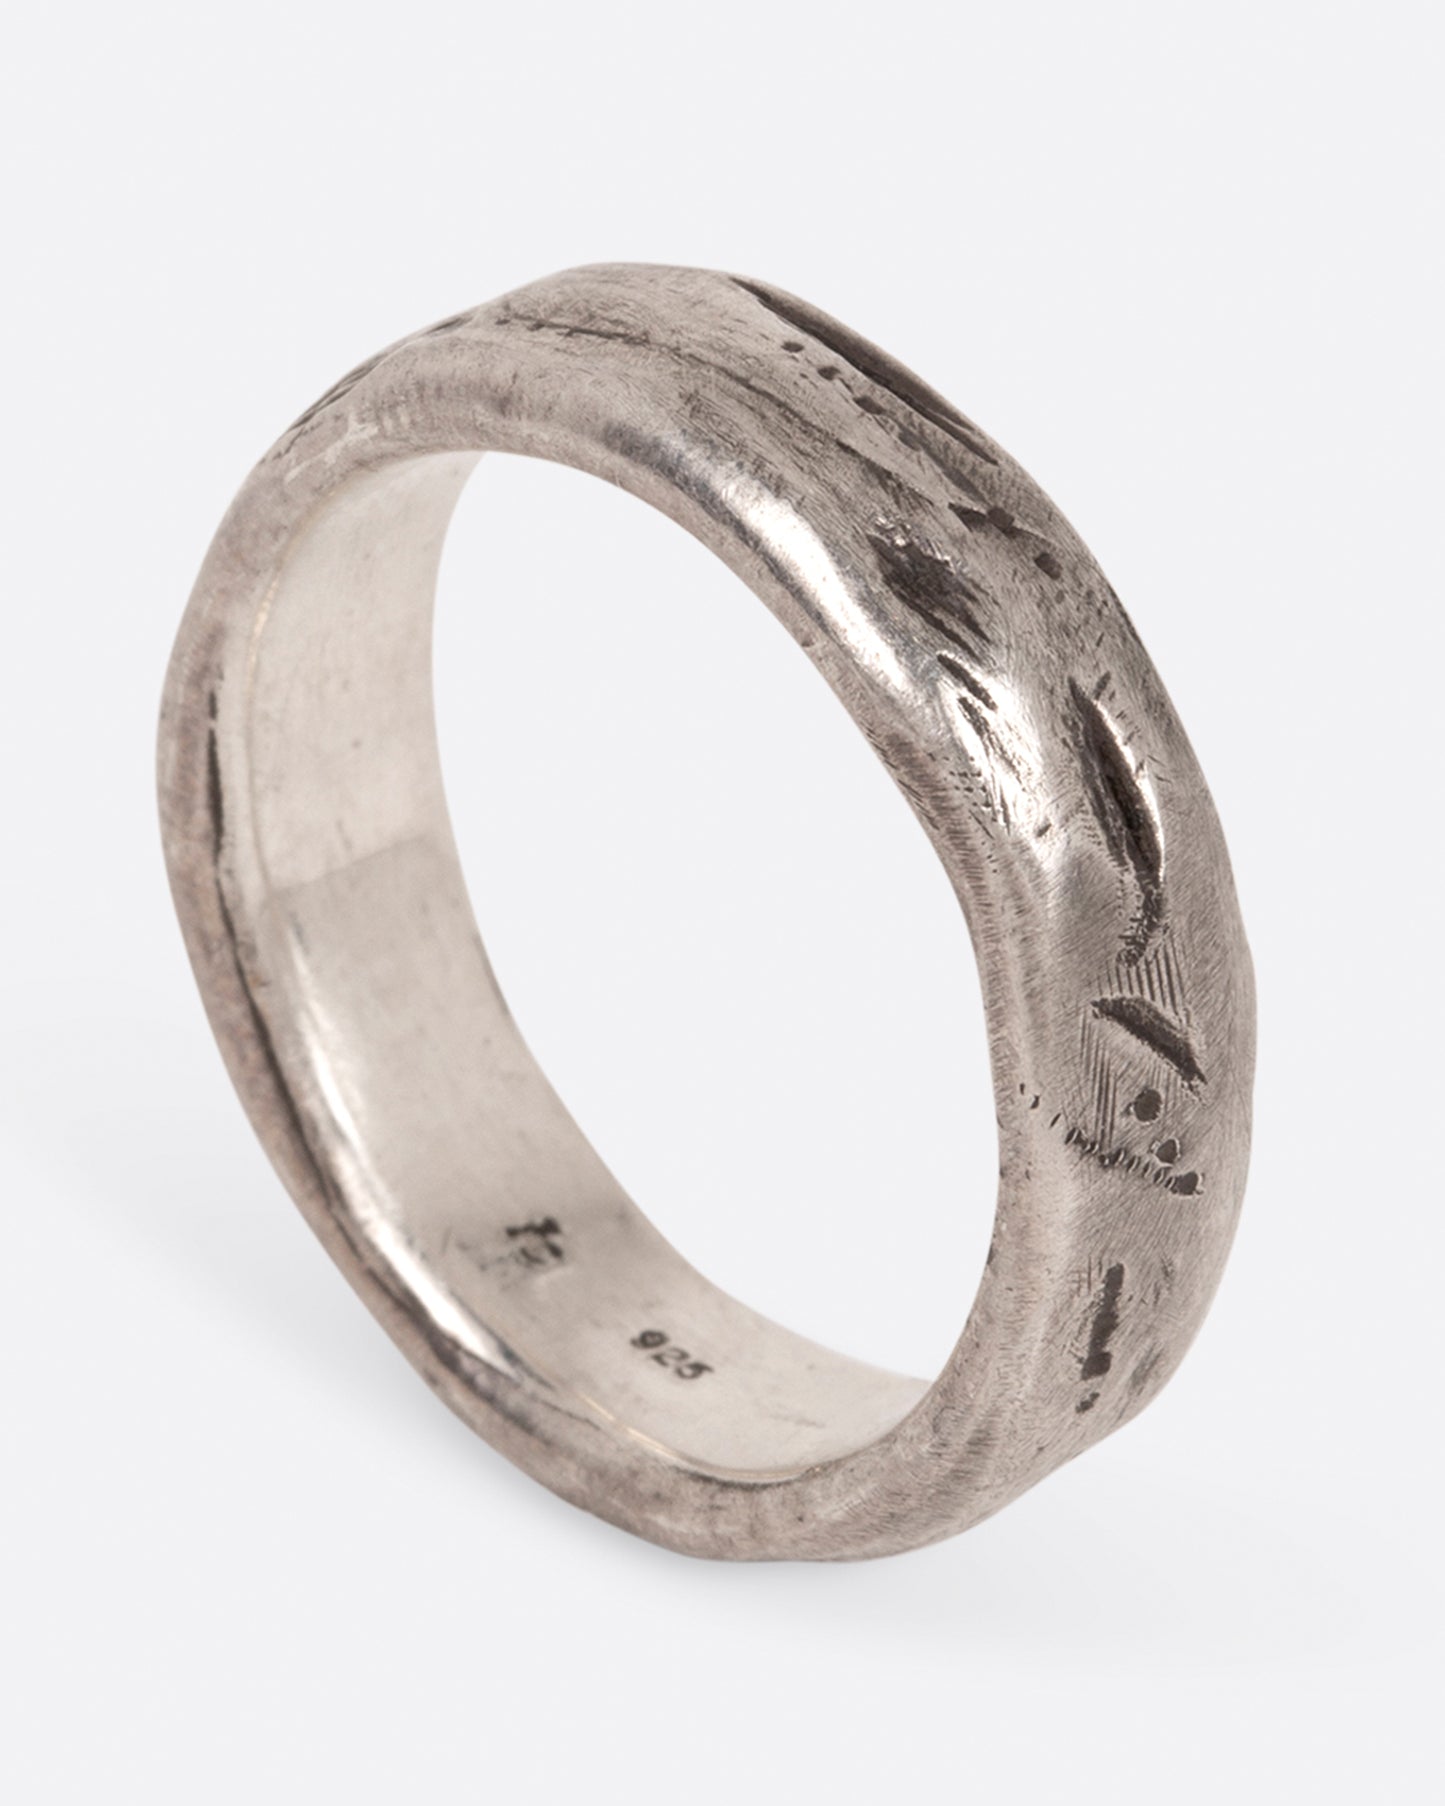 A textured sterling silver band that is meant to look worn in, shown standing up